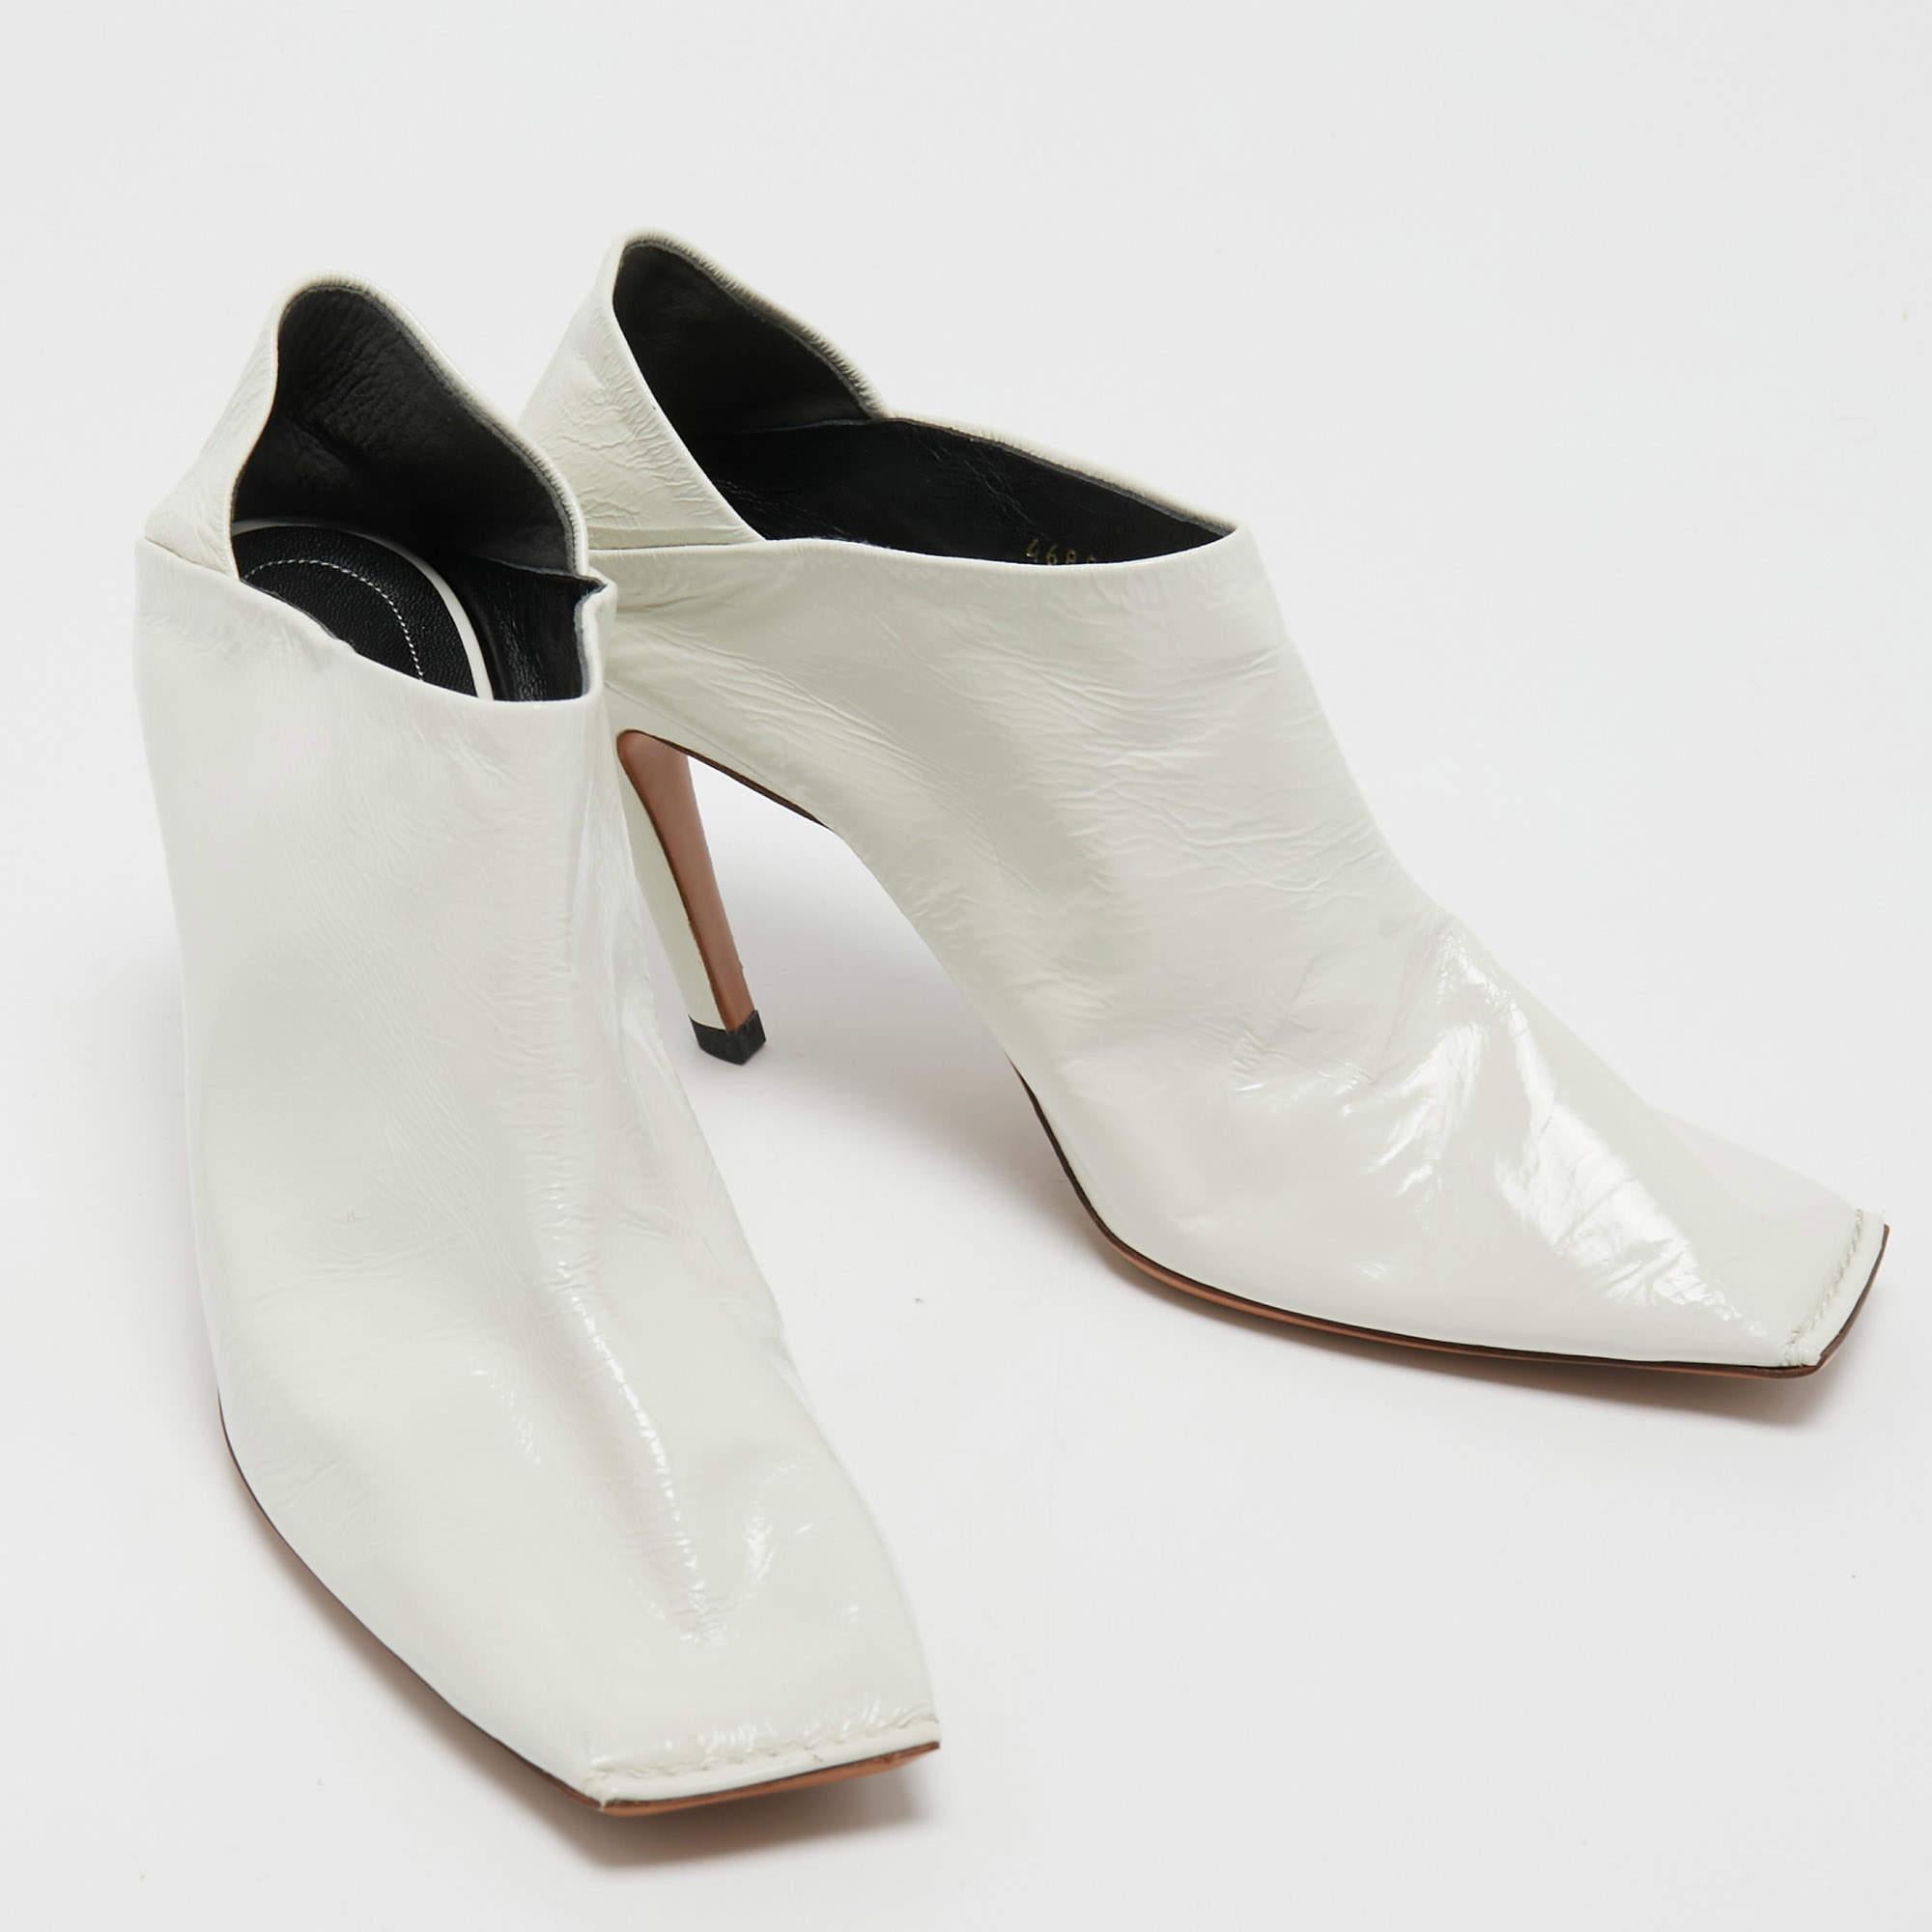 Let your latest shoe addition be this fabulous pair of booties from Balenciaga. The white booties are crafted from leather and feature square toes and 9 cm heels.

